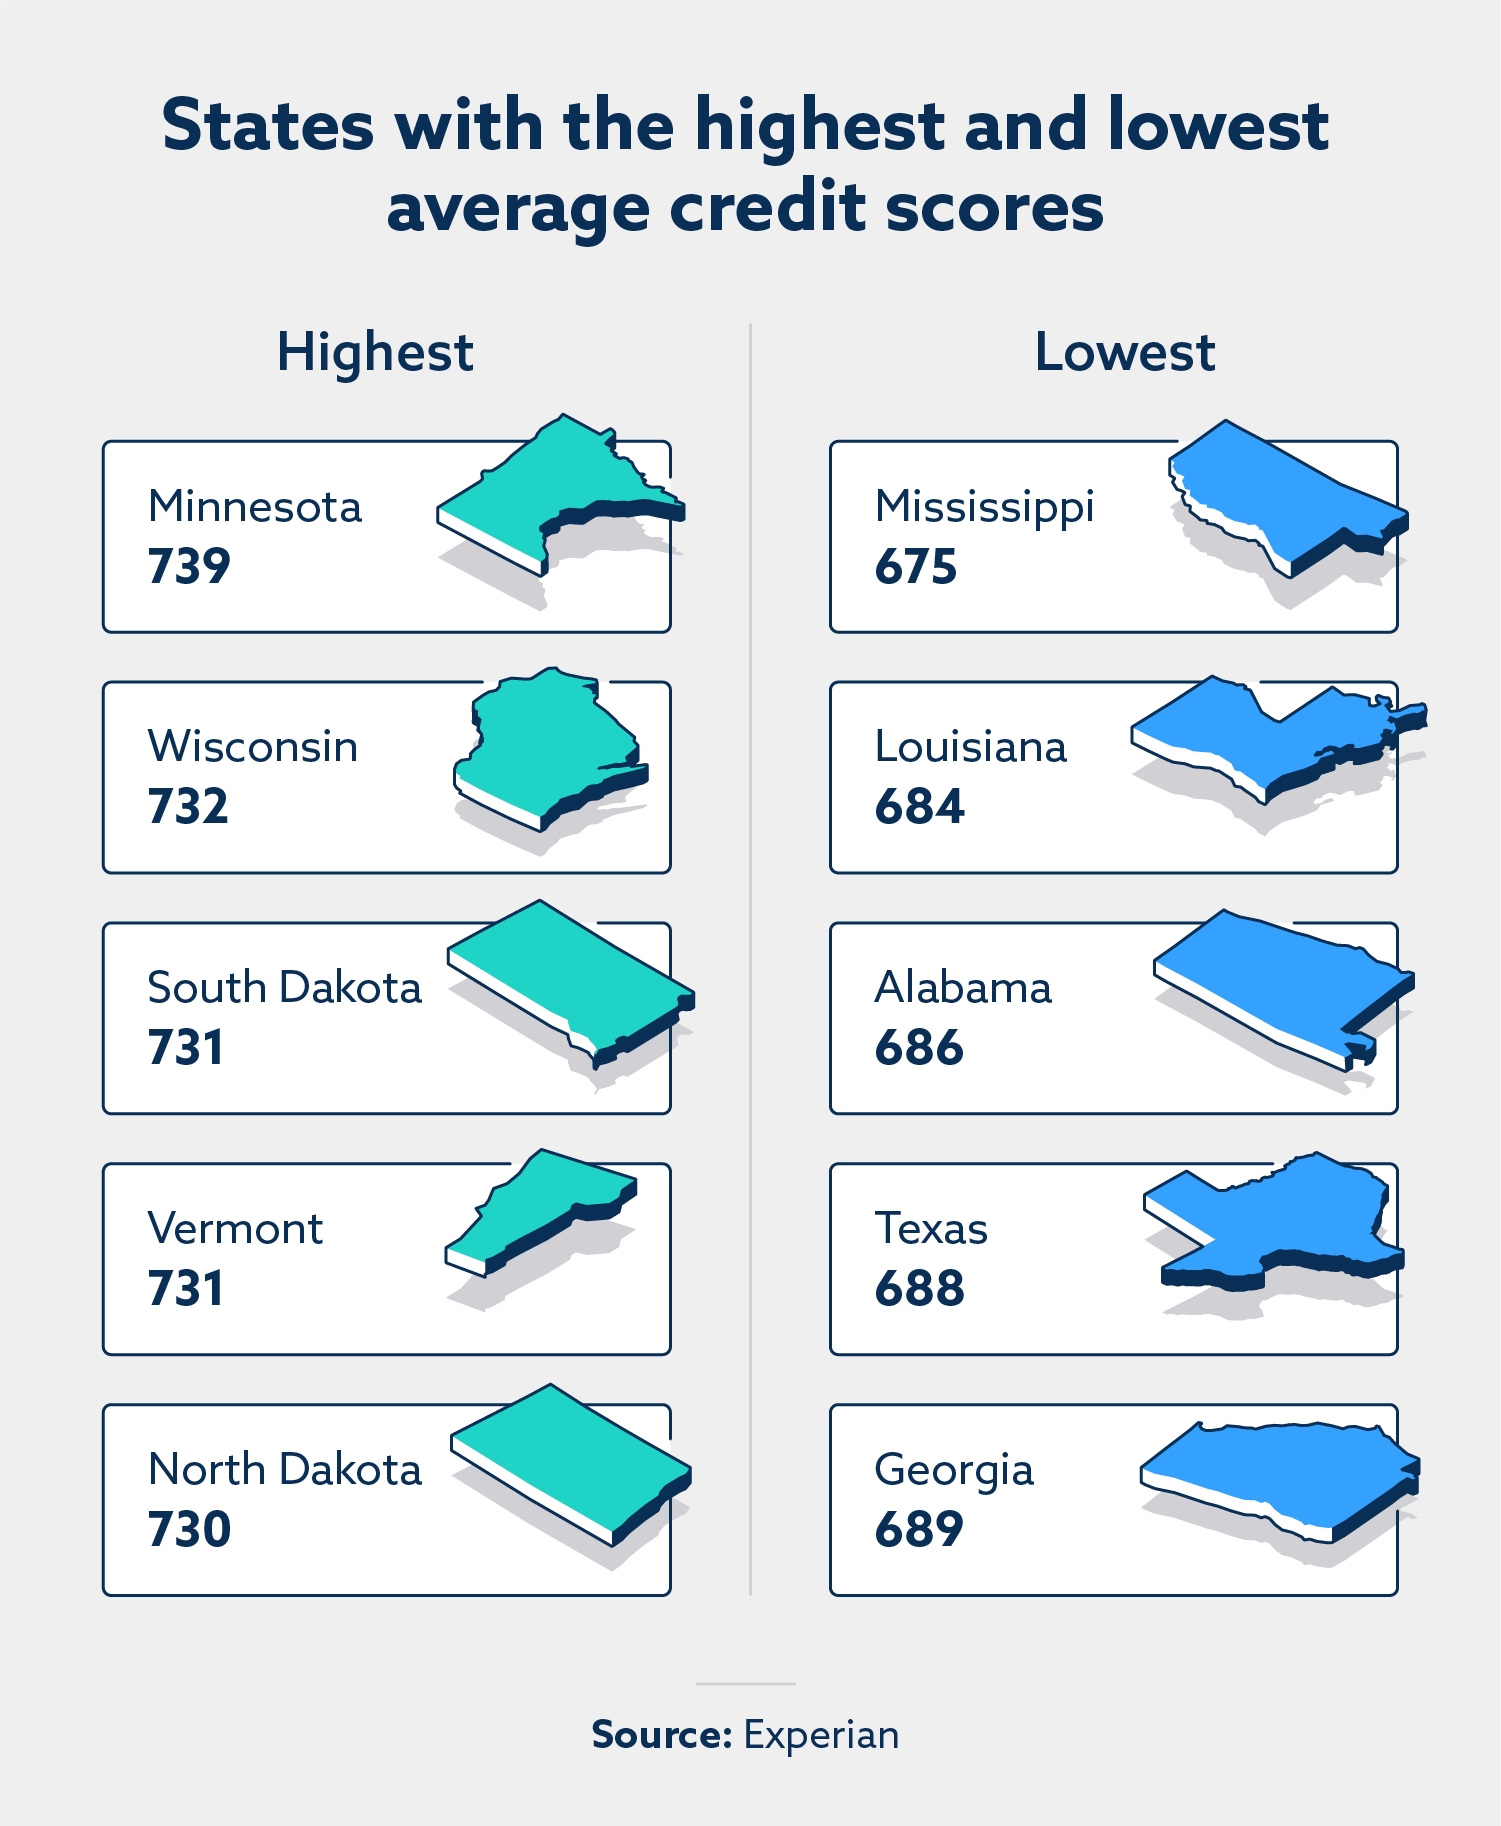 States with the highest and lowest credit scores.